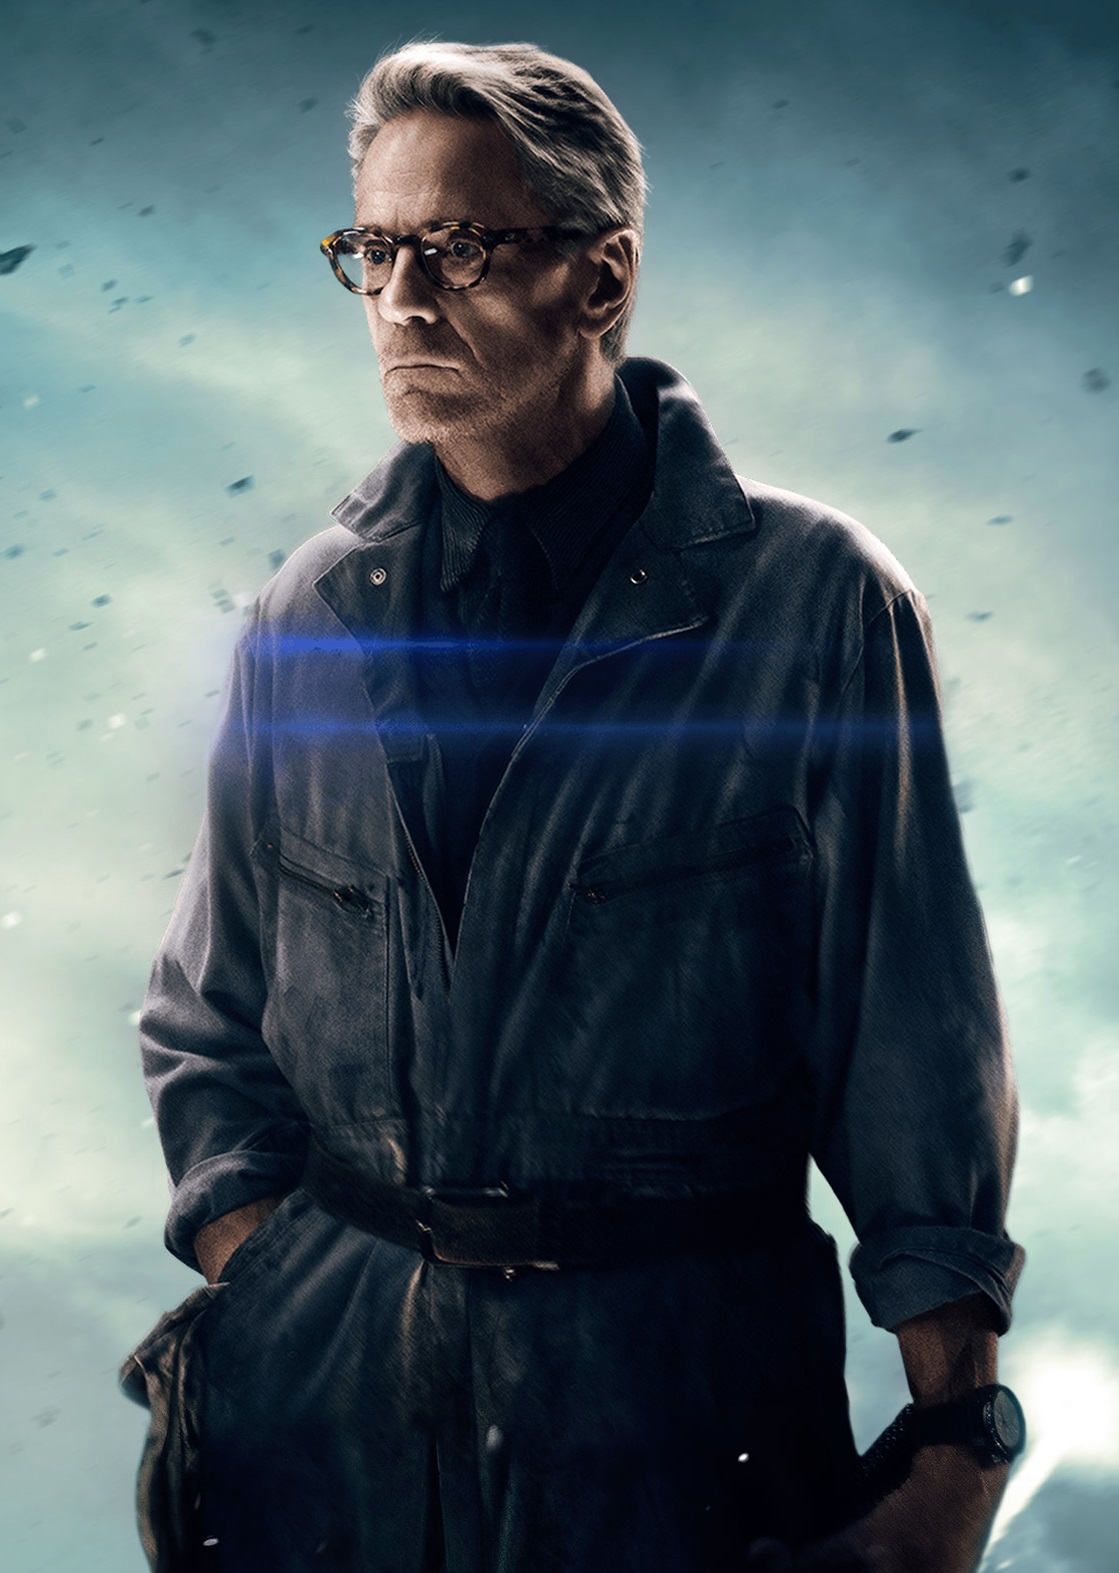 Alfred Pennyworth | DC Extended Universe Wiki | Fandom